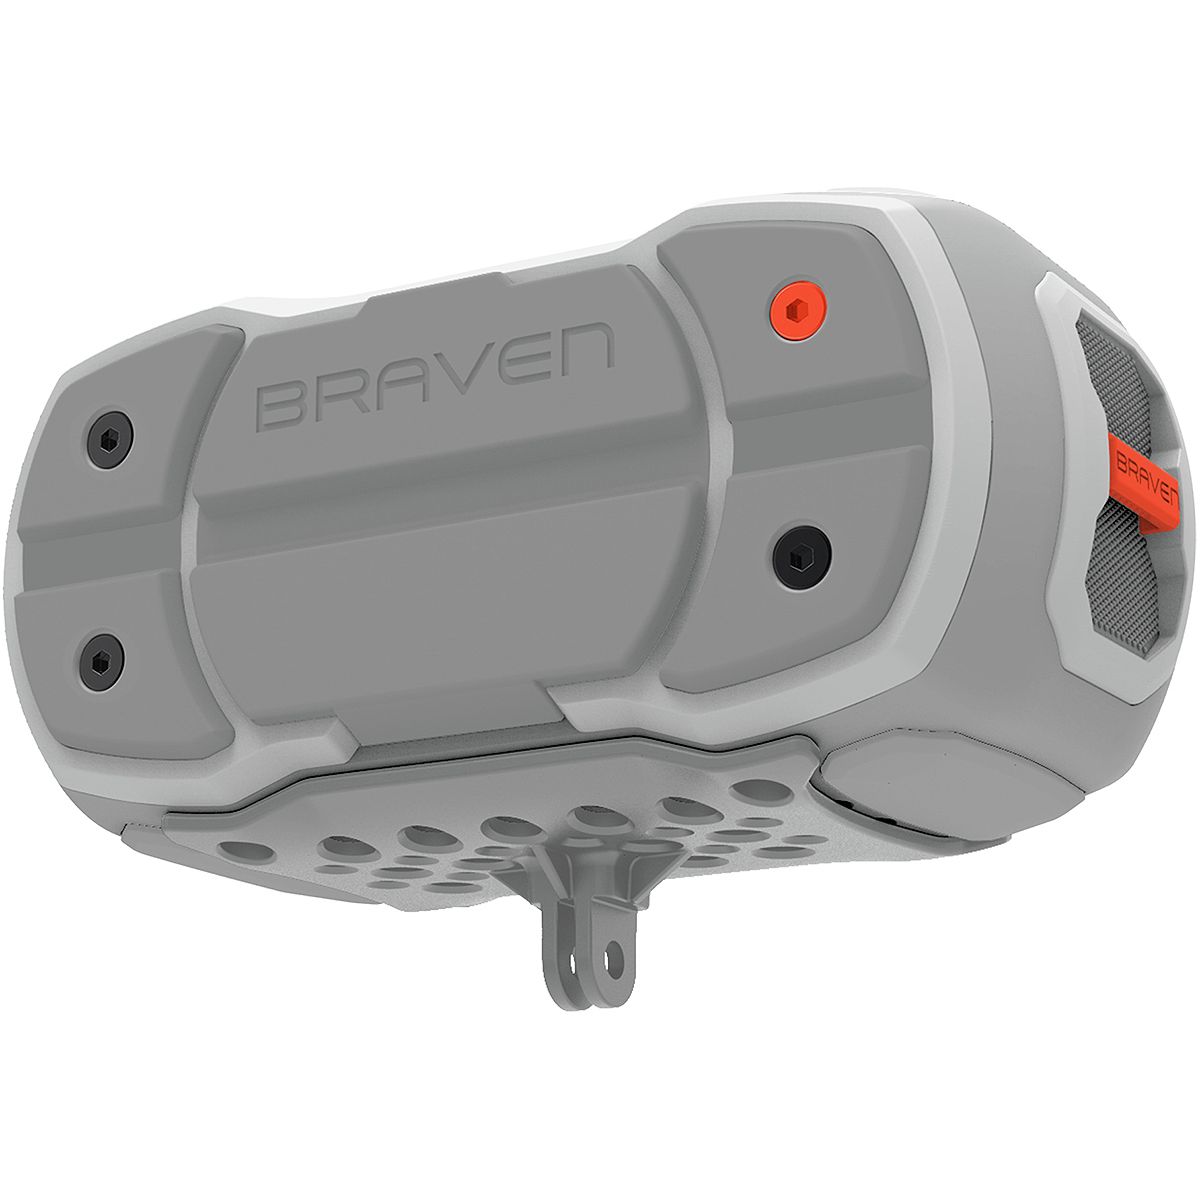 Man-made and nature-tested, the BRAVEN Ready Pro™ is a waterproof Bluetooth  speake…